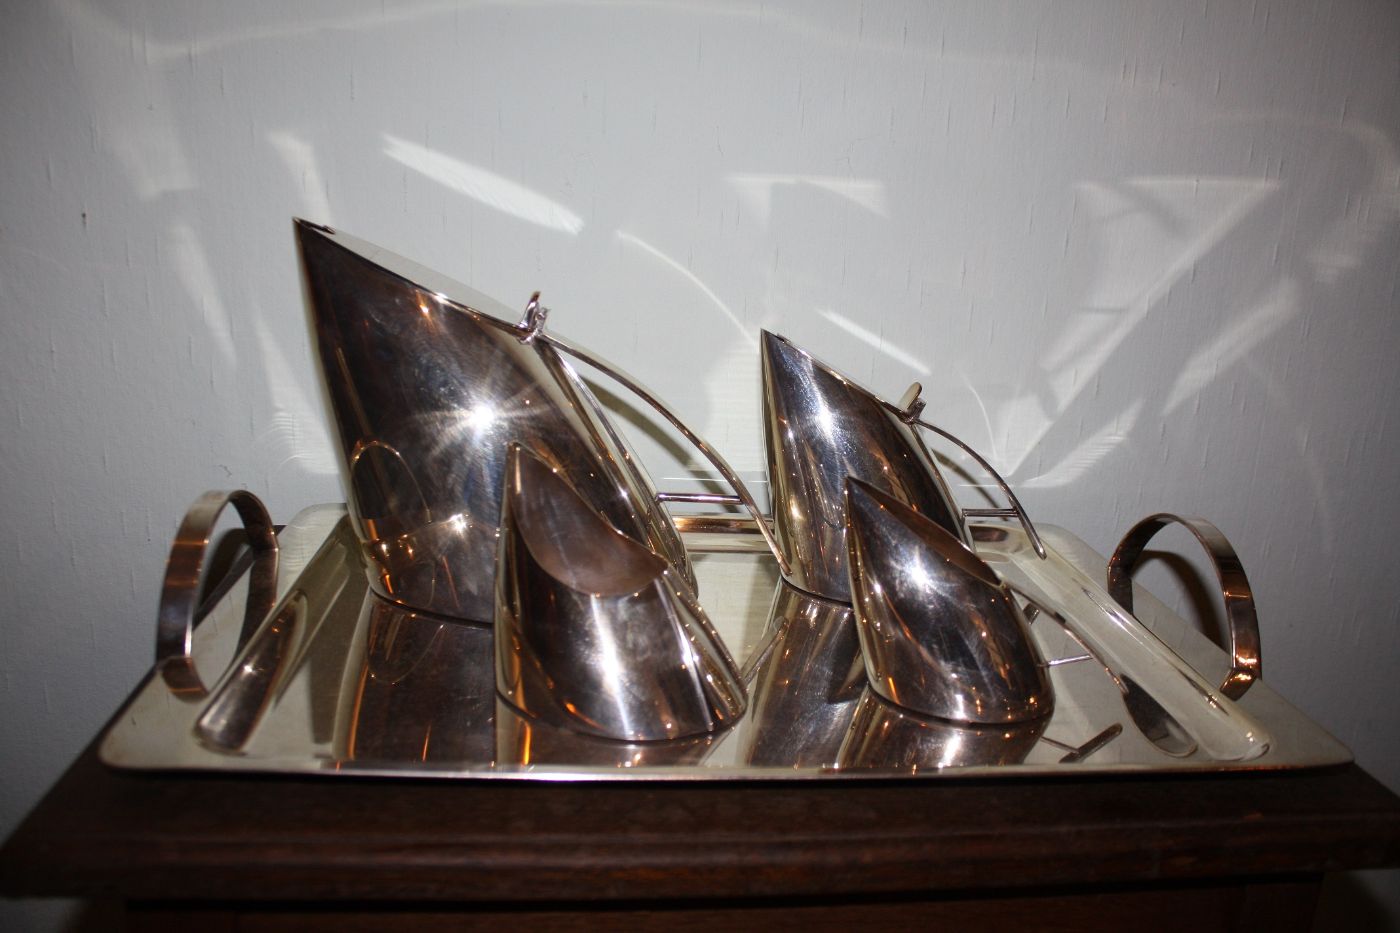 Italian Mid-1990's design silver plated metal Tea and Coffee Set and tray plate by Fala Argenteria, Italy  Height: Coffee Pot: 20 cm, Tea Pot: 15 cm